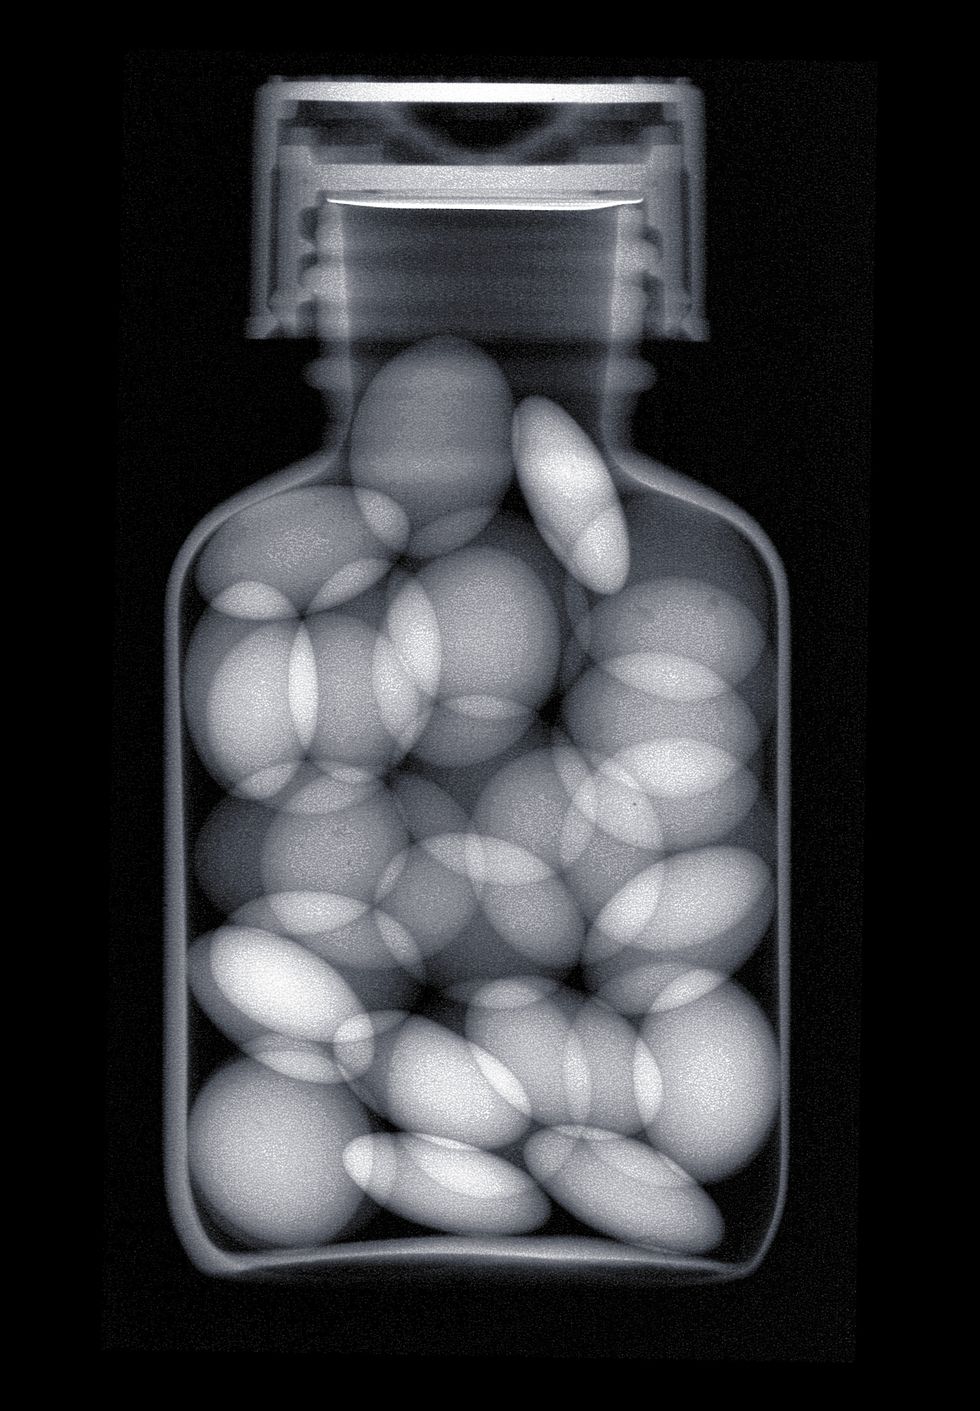 Still life photography, Pill, Capsule, Black-and-white, Photography, Still life, Vegetarian food, Prescription drug, Food, 